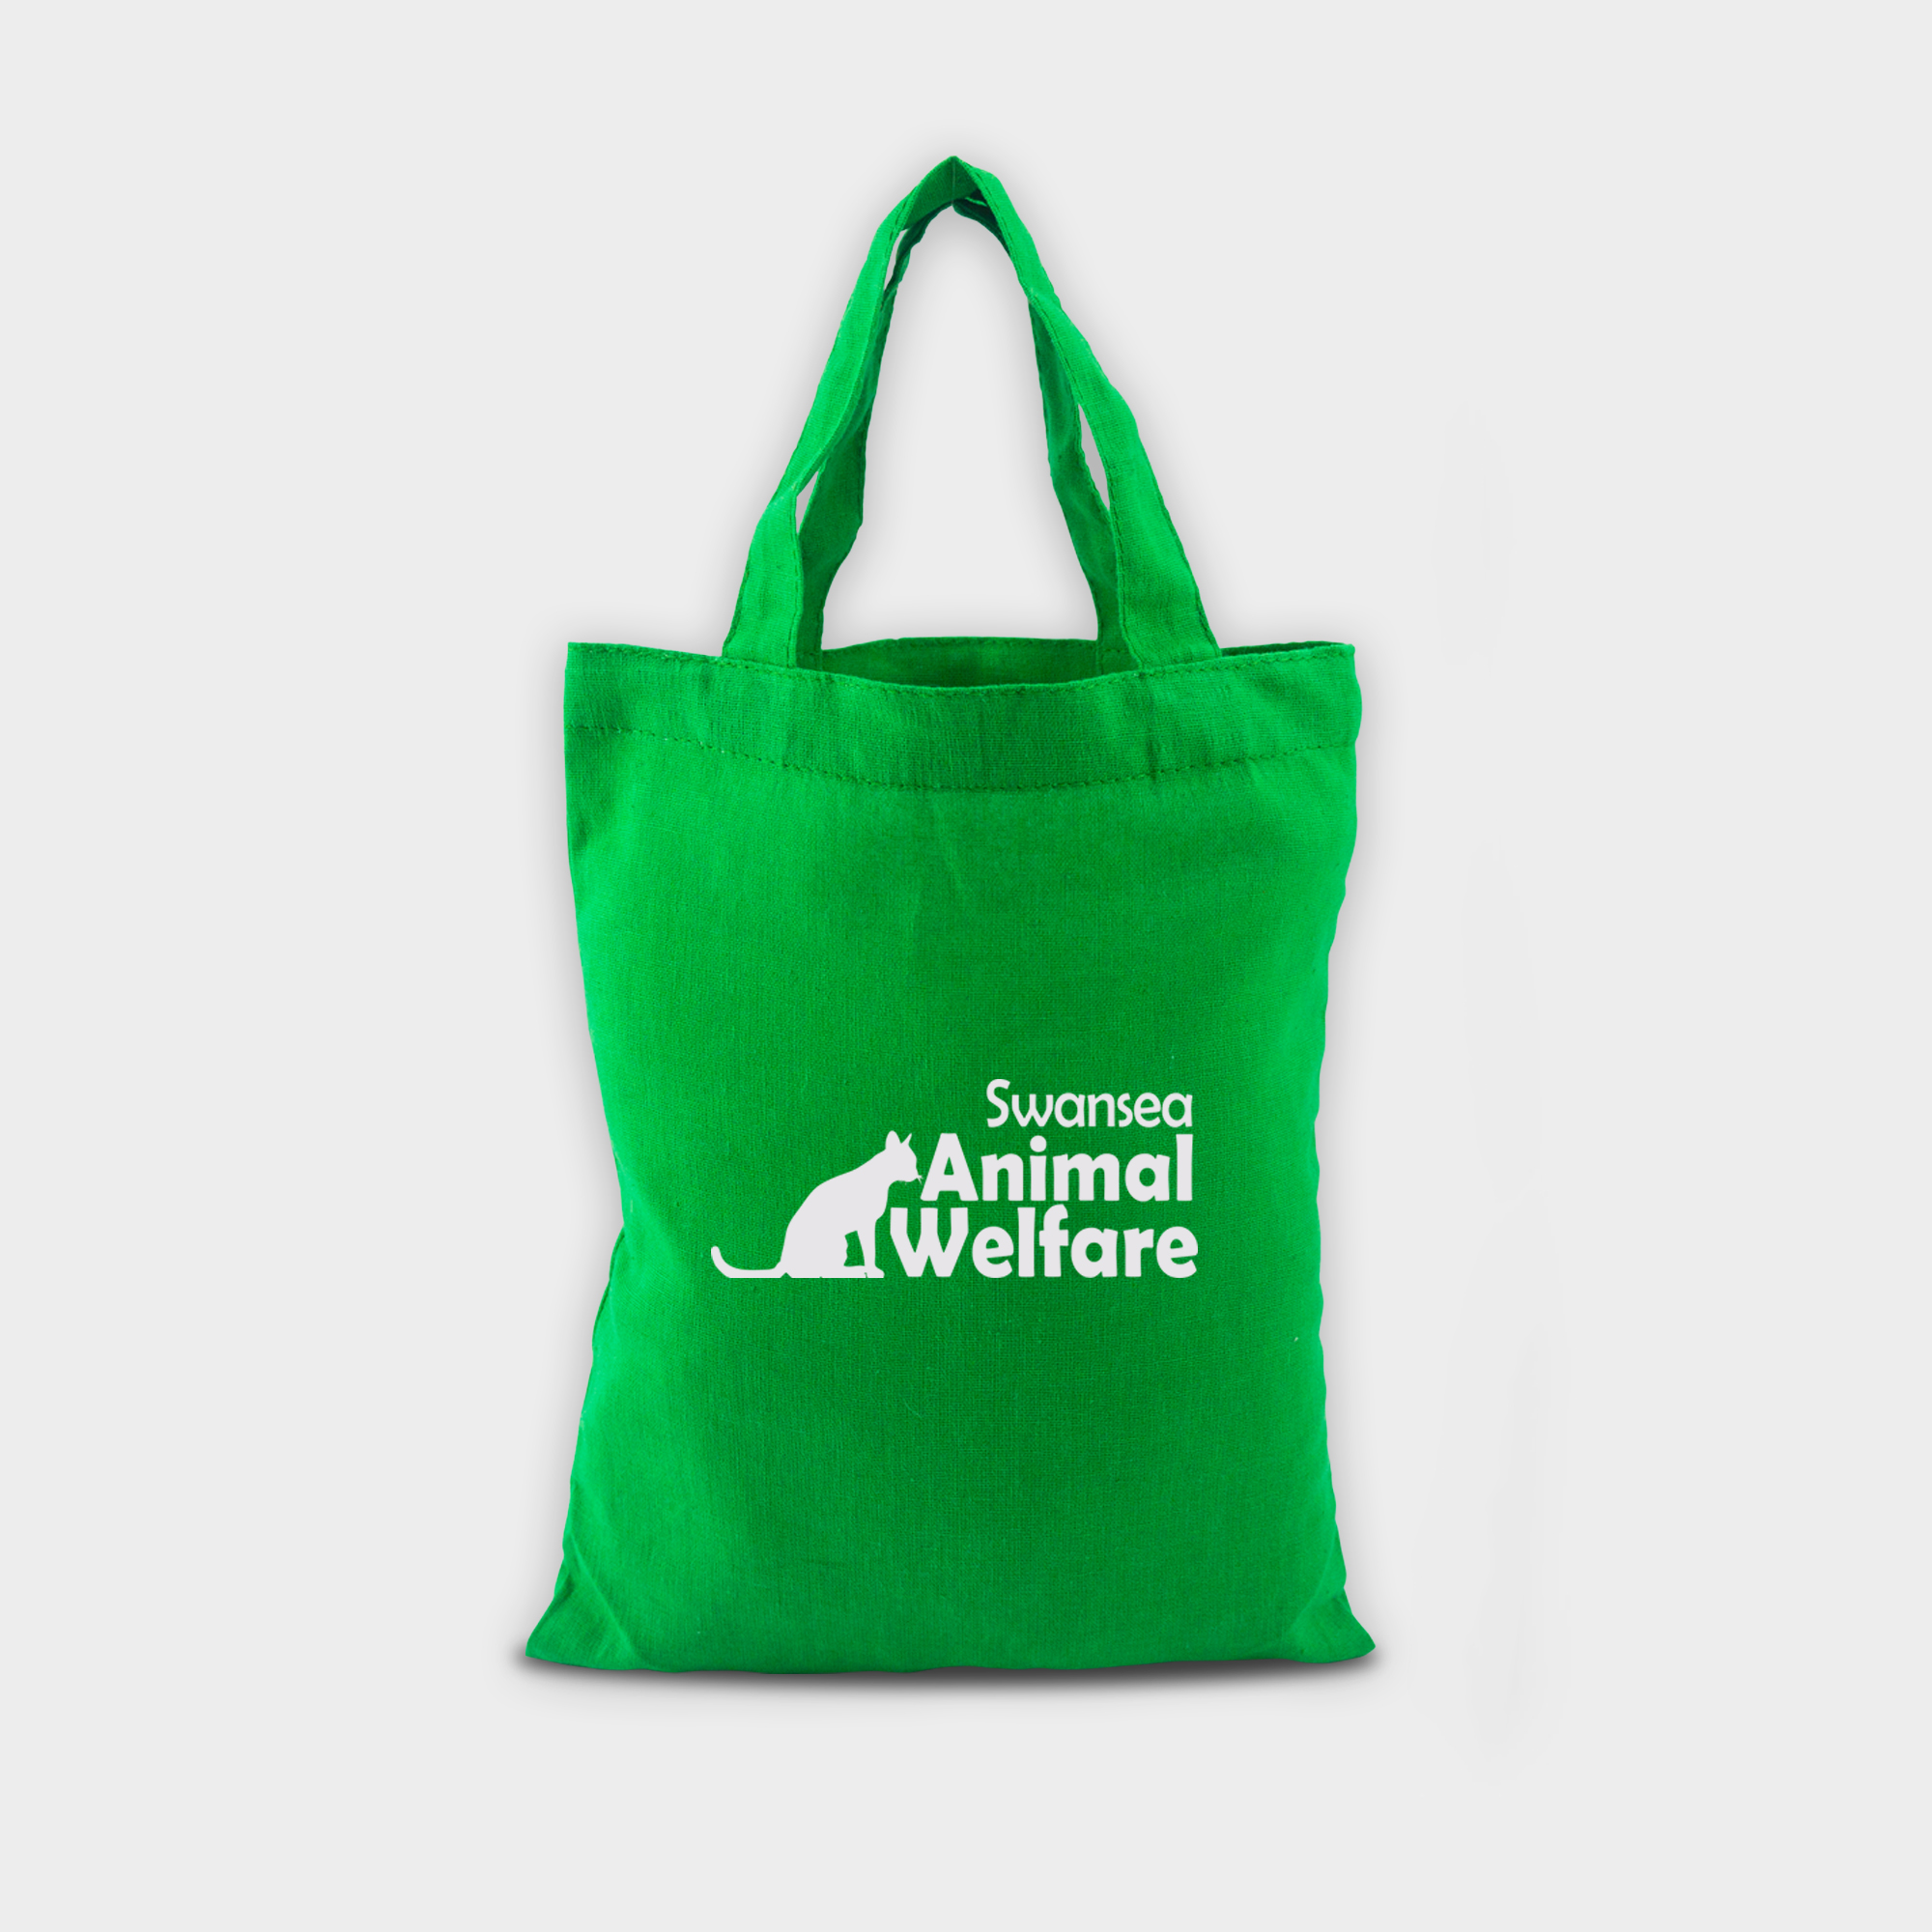 The Green & Good Greenwich Bag is made from coloured natural cotton. This bag has been dyed with AZO-free dyes, which are better for the environment. Small tote bag with short handles. Perfect for those special gifts. Ethically produced in India in an audited factory. 4oz / 120gsm cotton.